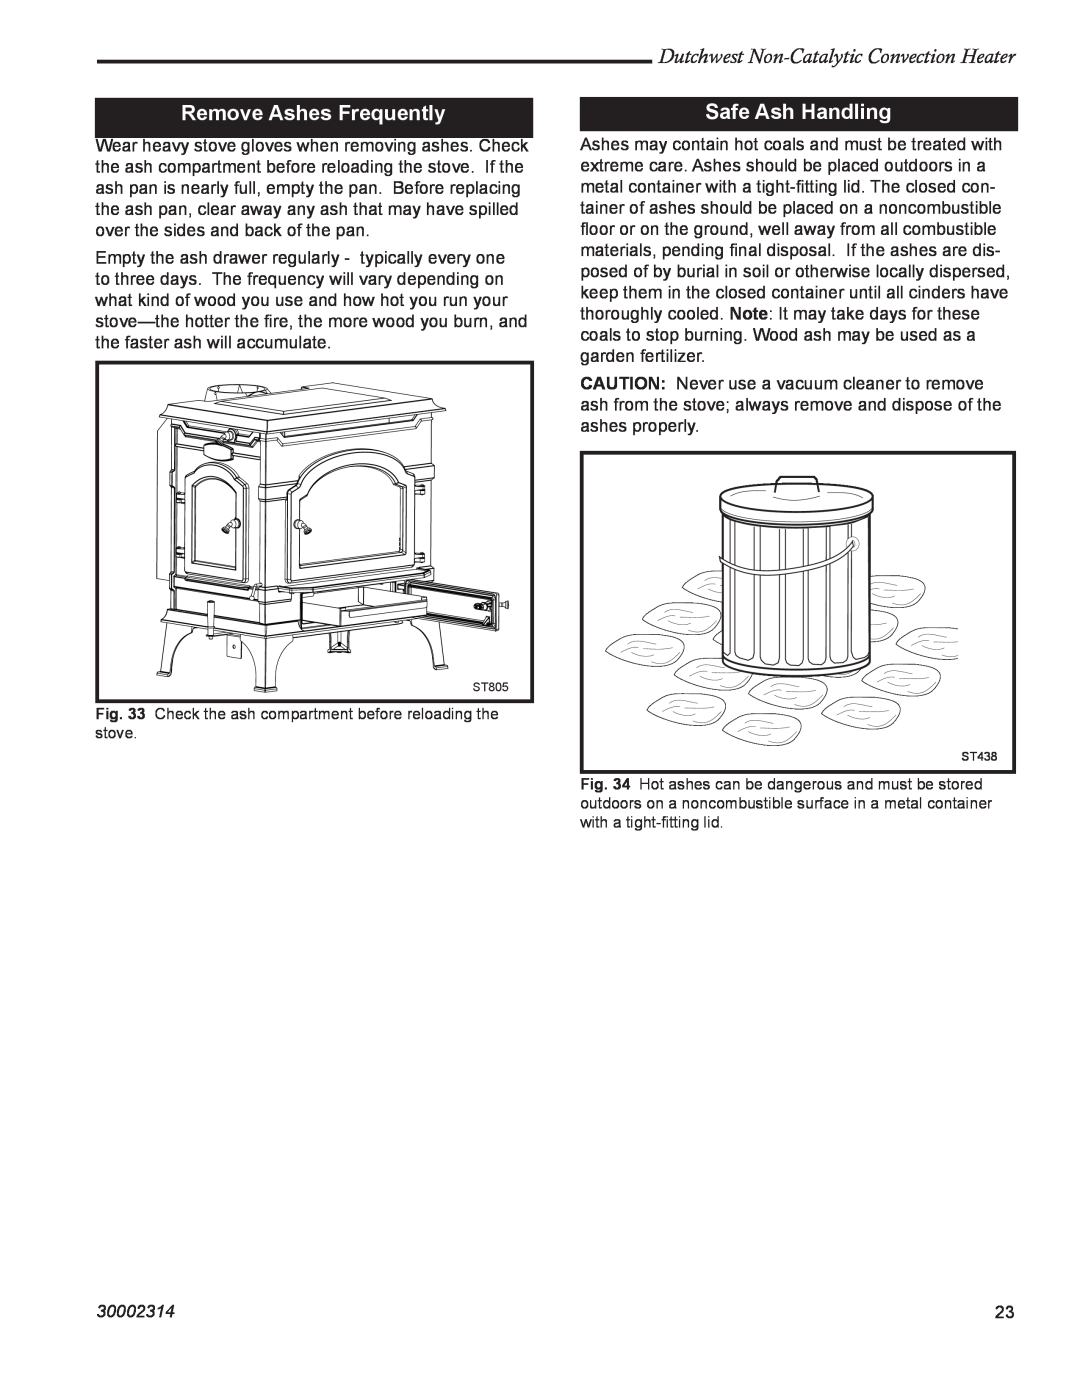 Vermont Casting 2477 Remove Ashes Frequently, Safe Ash Handling, Dutchwest Non-CatalyticConvection Heater, 30002314, stove 